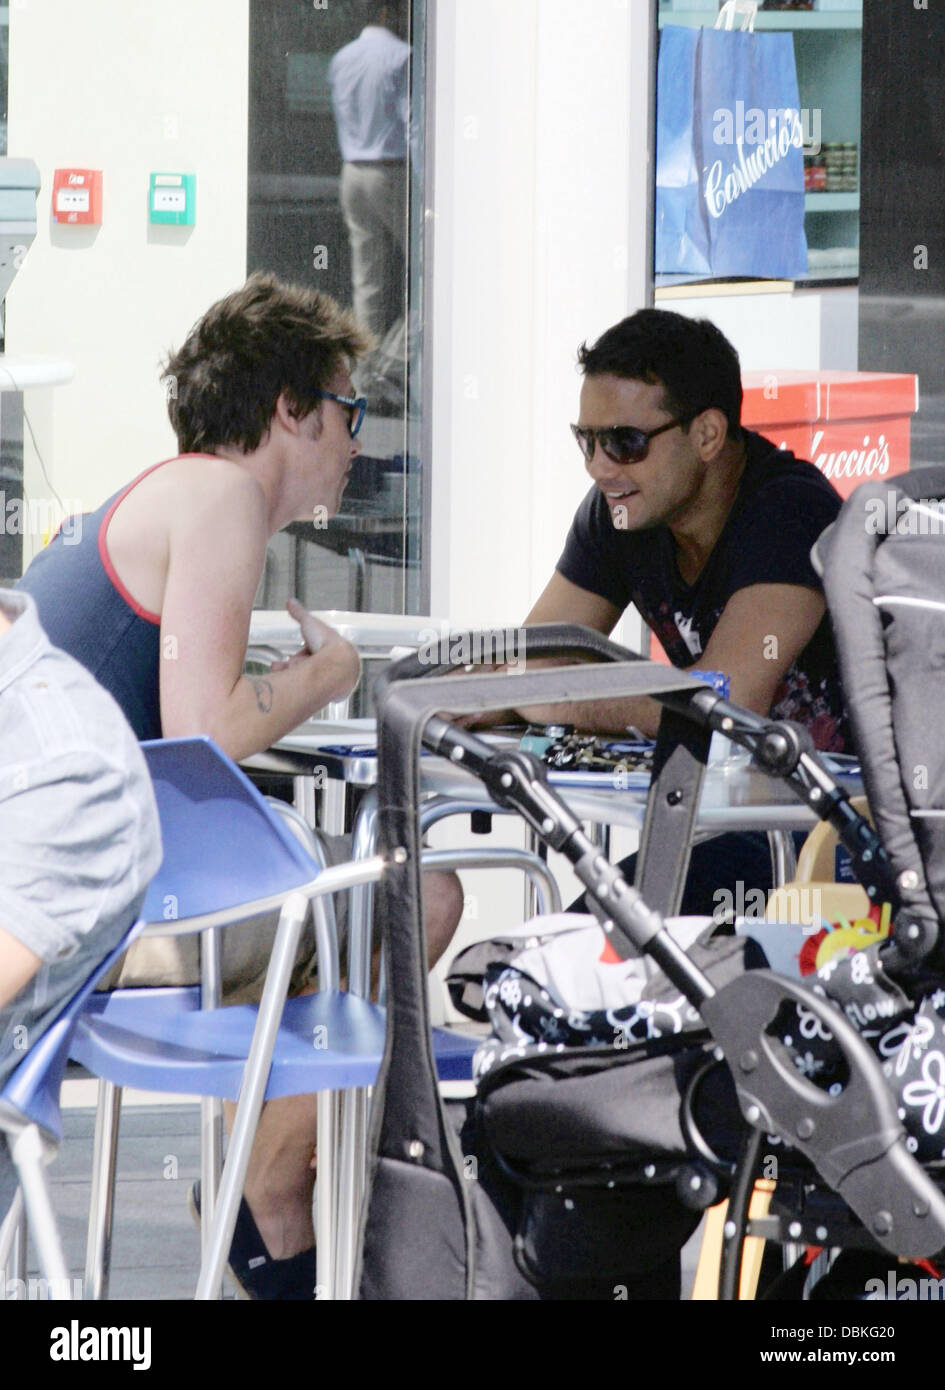 Coronation Street actor Ryan Thomas and Hollyoaks actor Andrew Moss go for coffee  Manchester, England - 04.07.11 Stock Photo